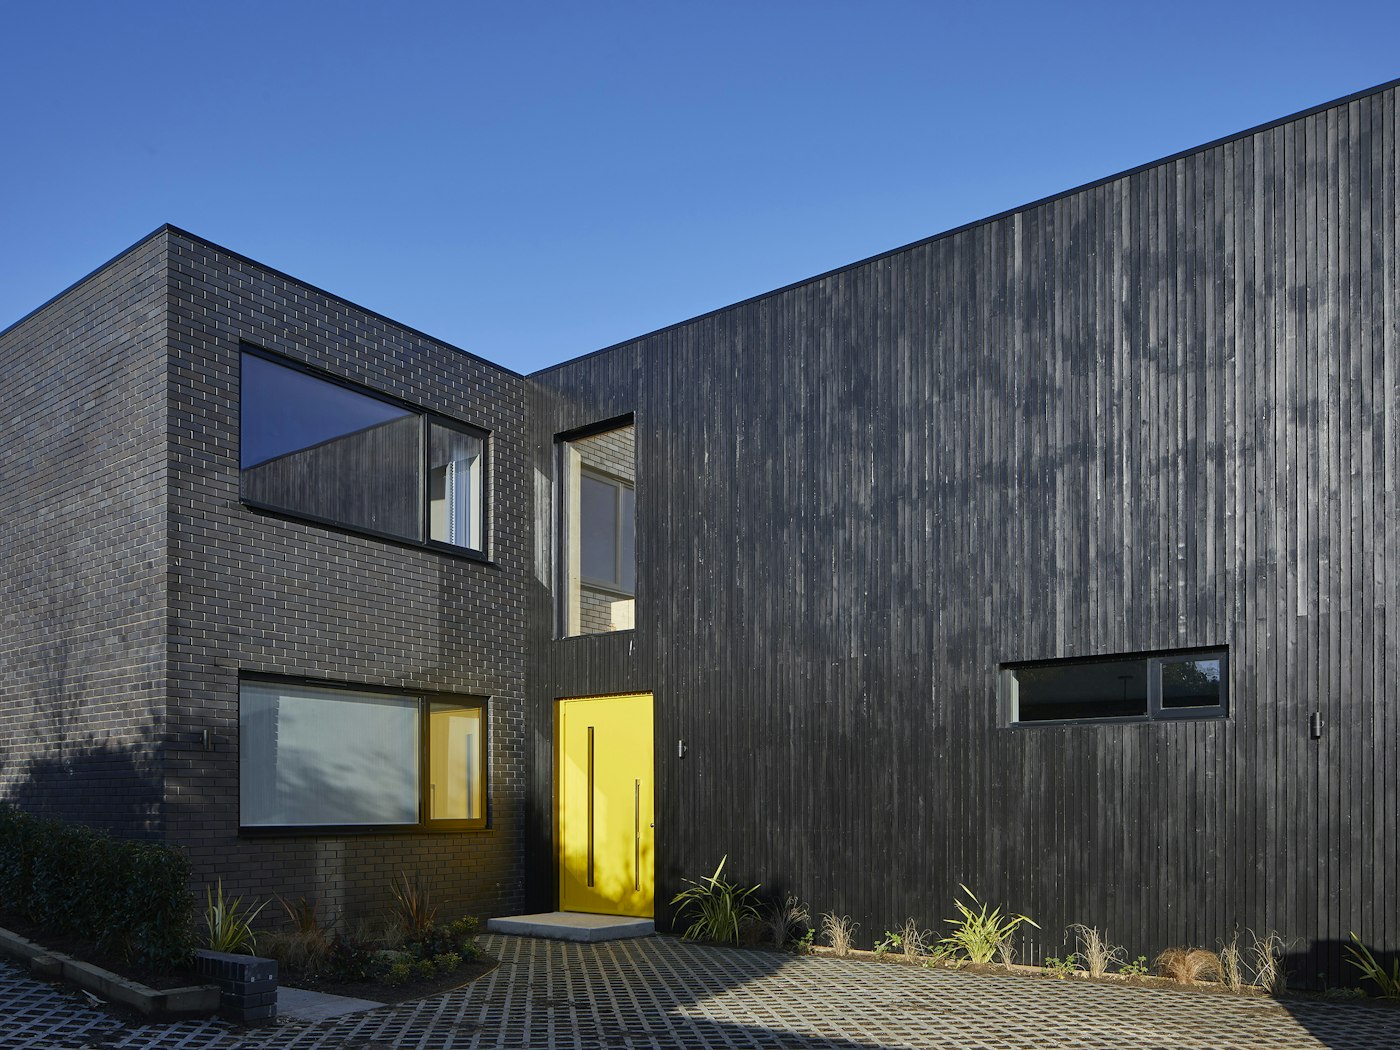 The door is an obvious choice to make a focal point. Colour is a really simple way to "wow" as this charred brick and black-clad house with bold yellow door highlights